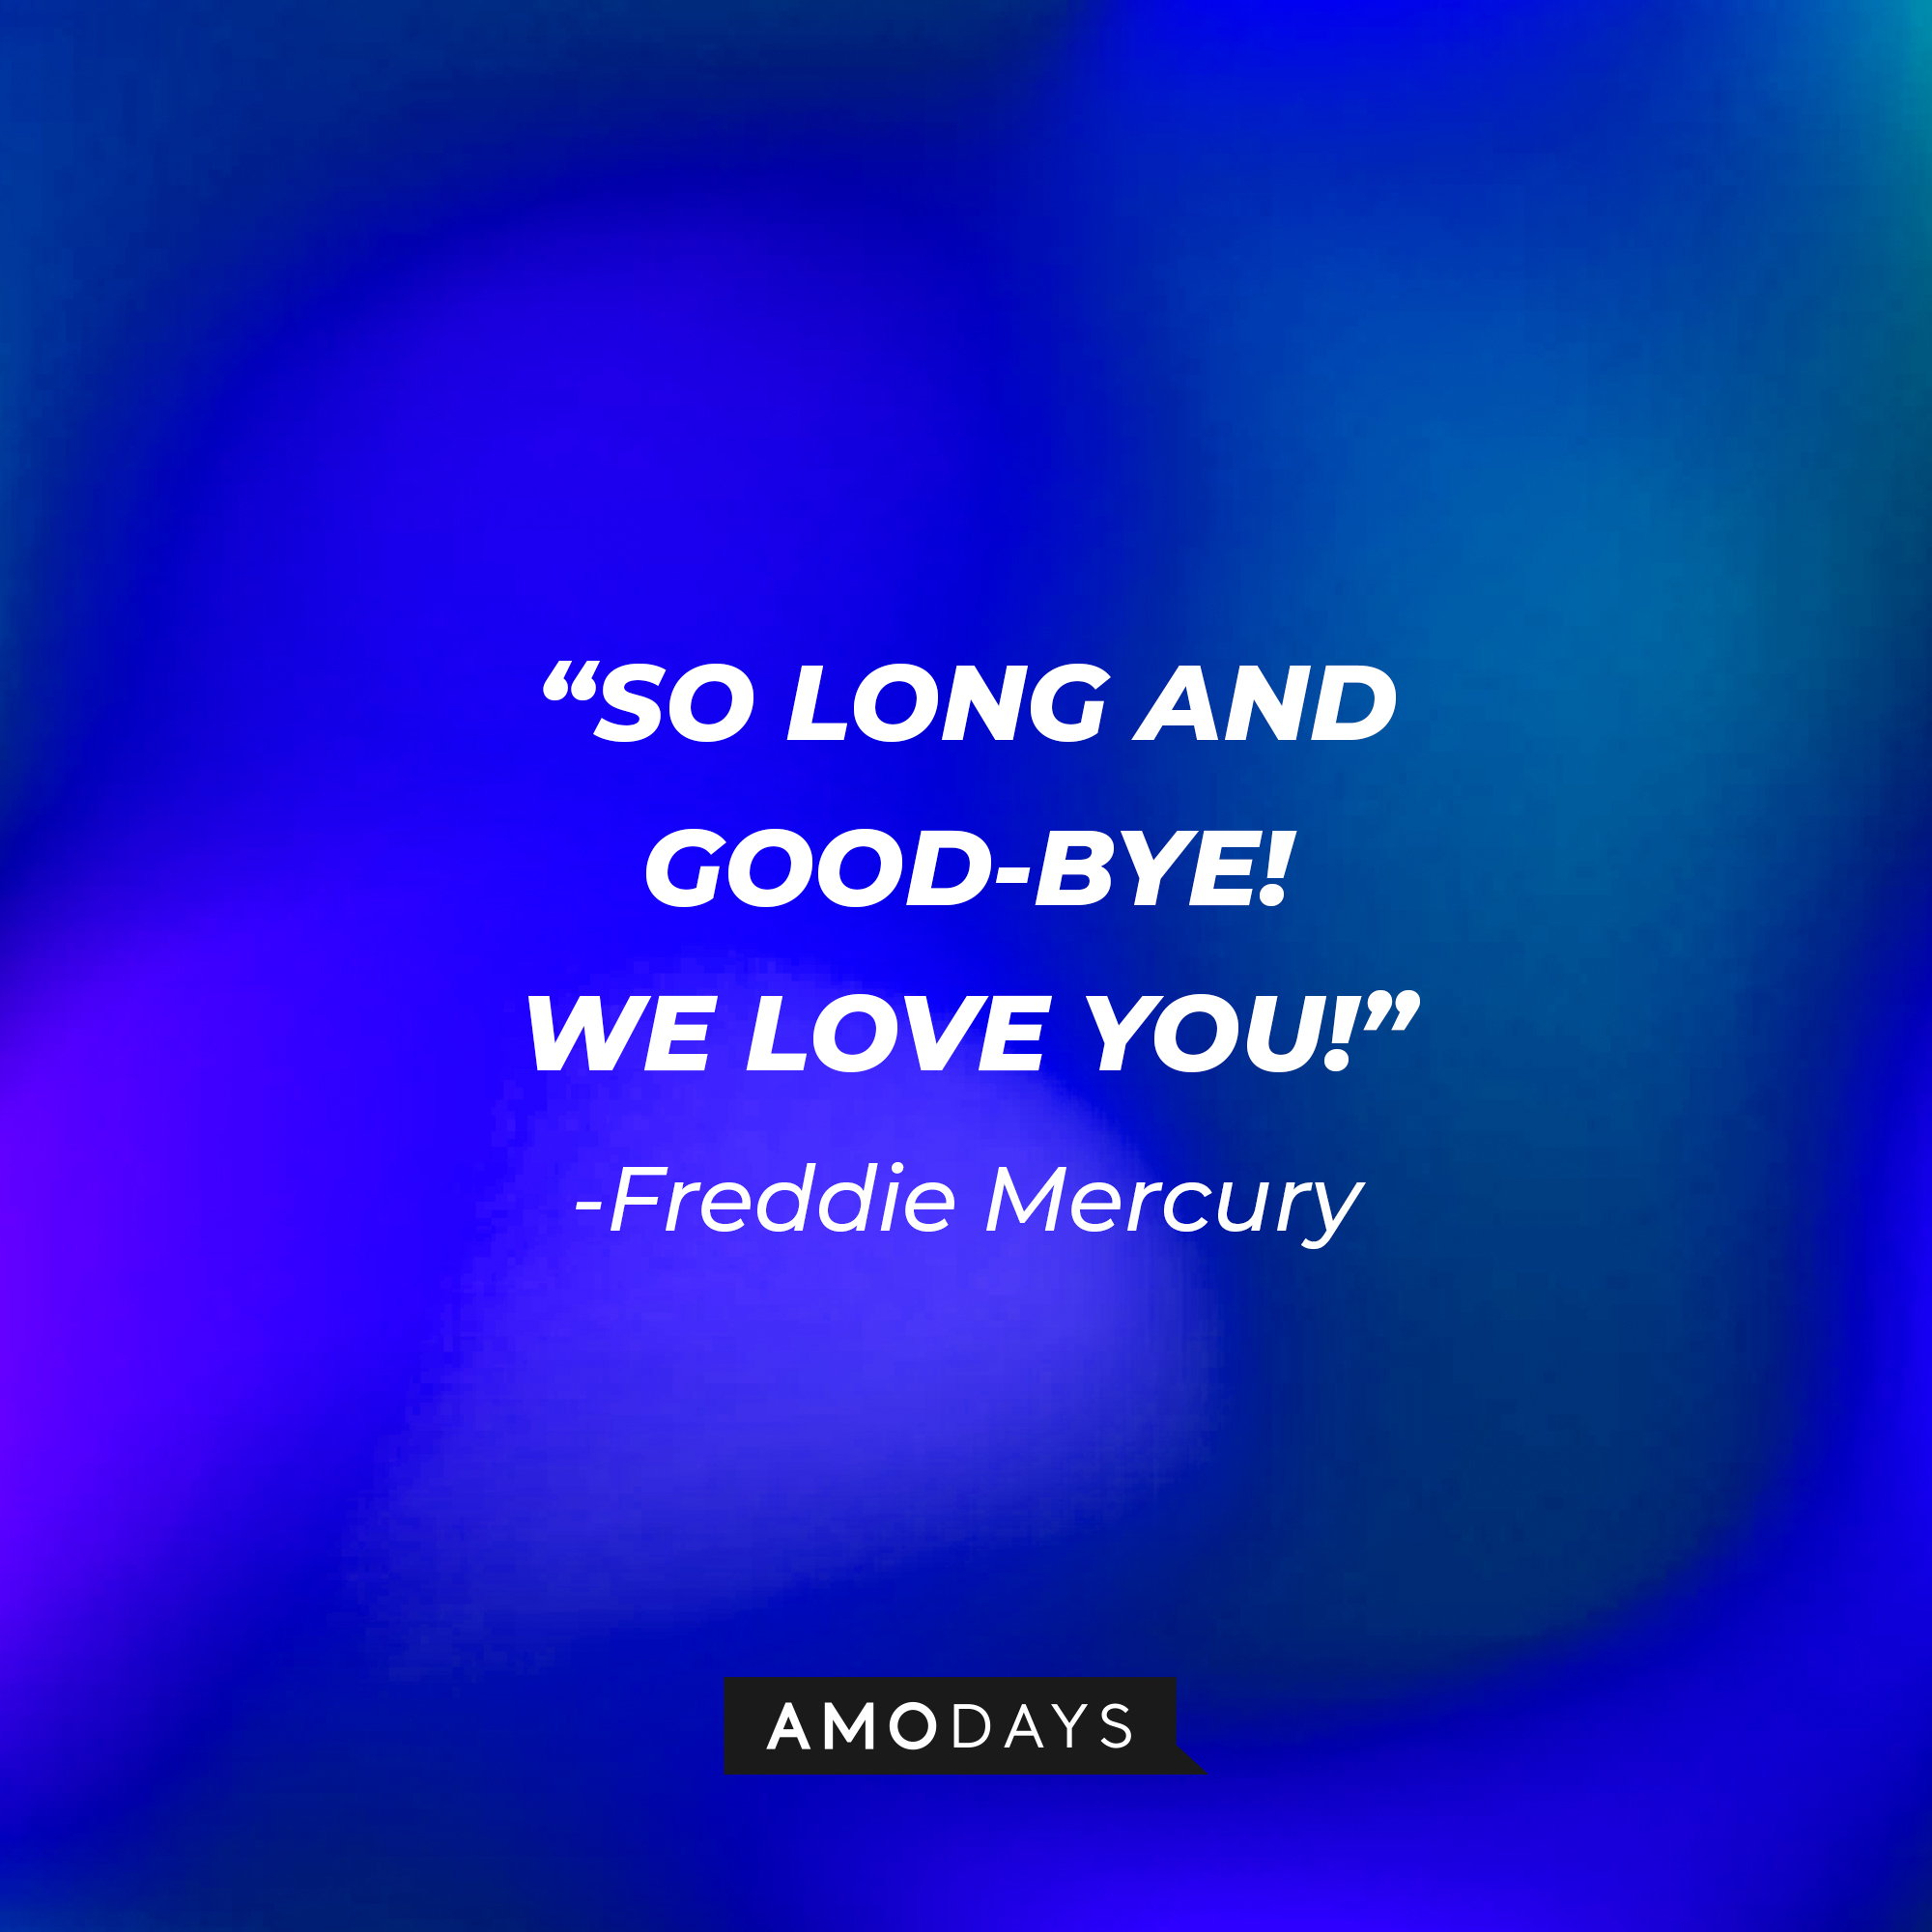 Freddie Mercury with his quote: "SO LONG AND GOOD-BYE! WE LOVE YOU!" | Source: Amodays